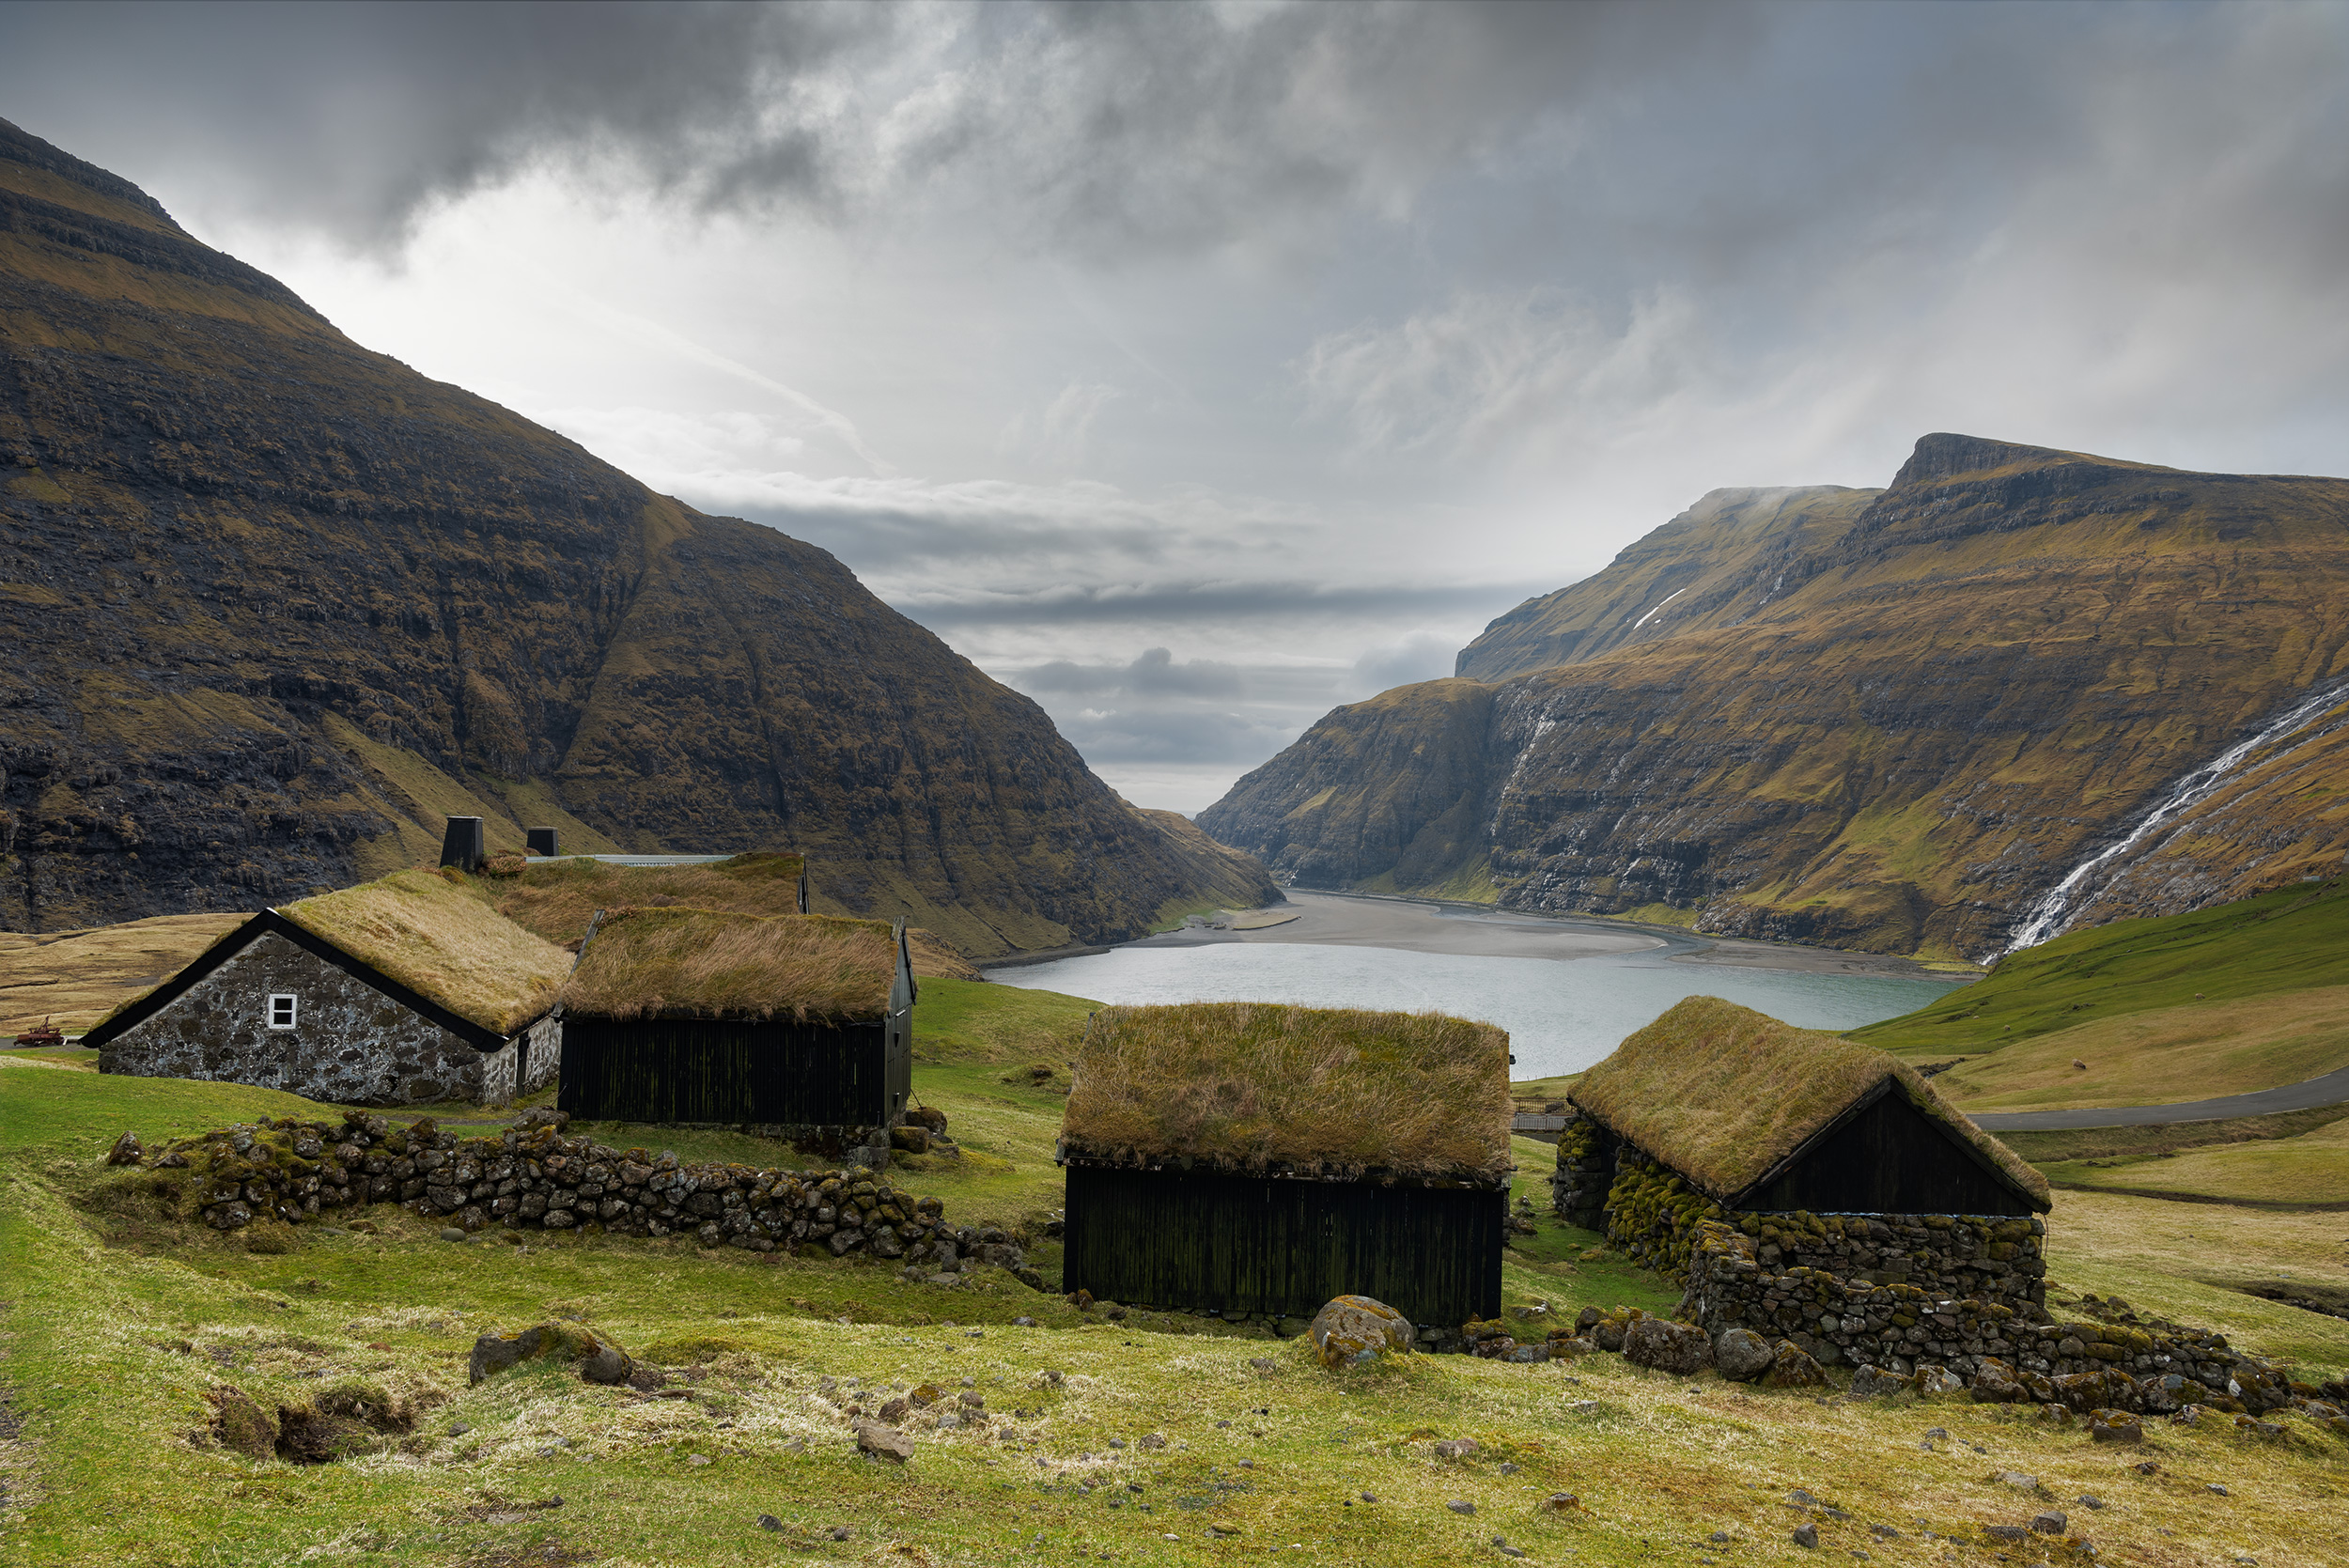 View of the village of Saksun and its grass-roofed houses on the island of Streymoy, Faroe Islands.